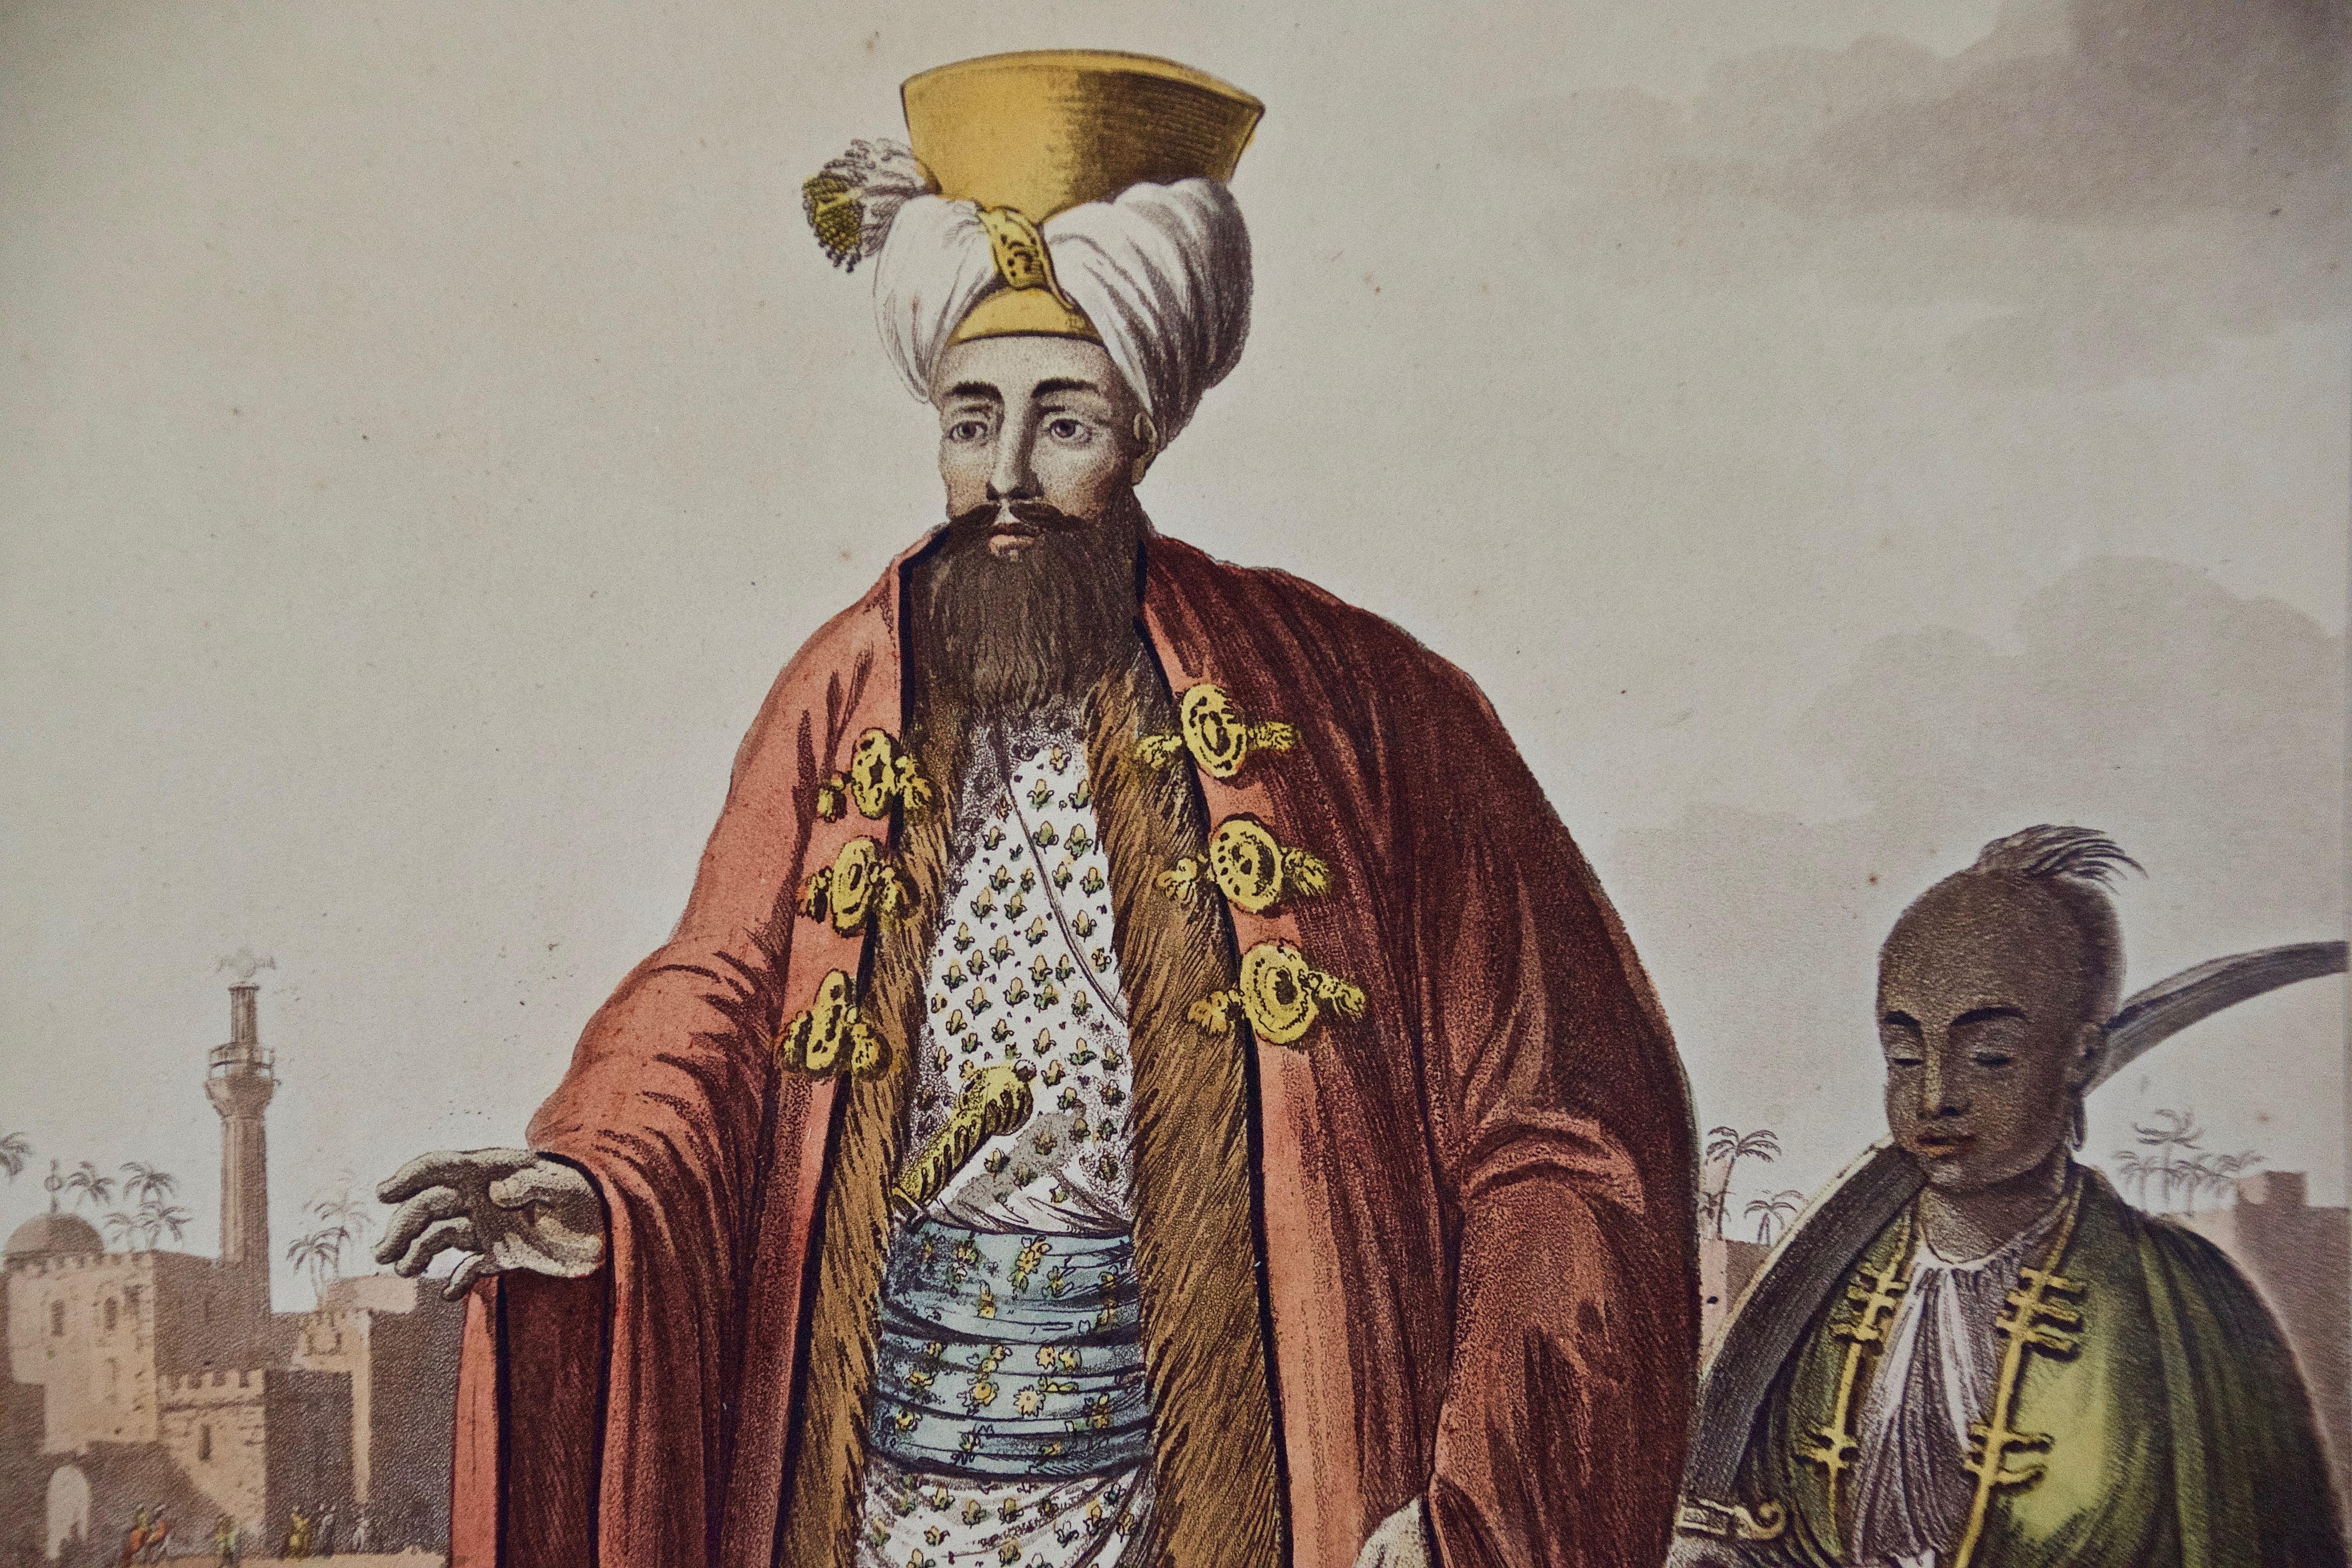 A Hand Colored Engraving of an 18th-19th Century Egyptian Ruler by Luigi Mayer  1